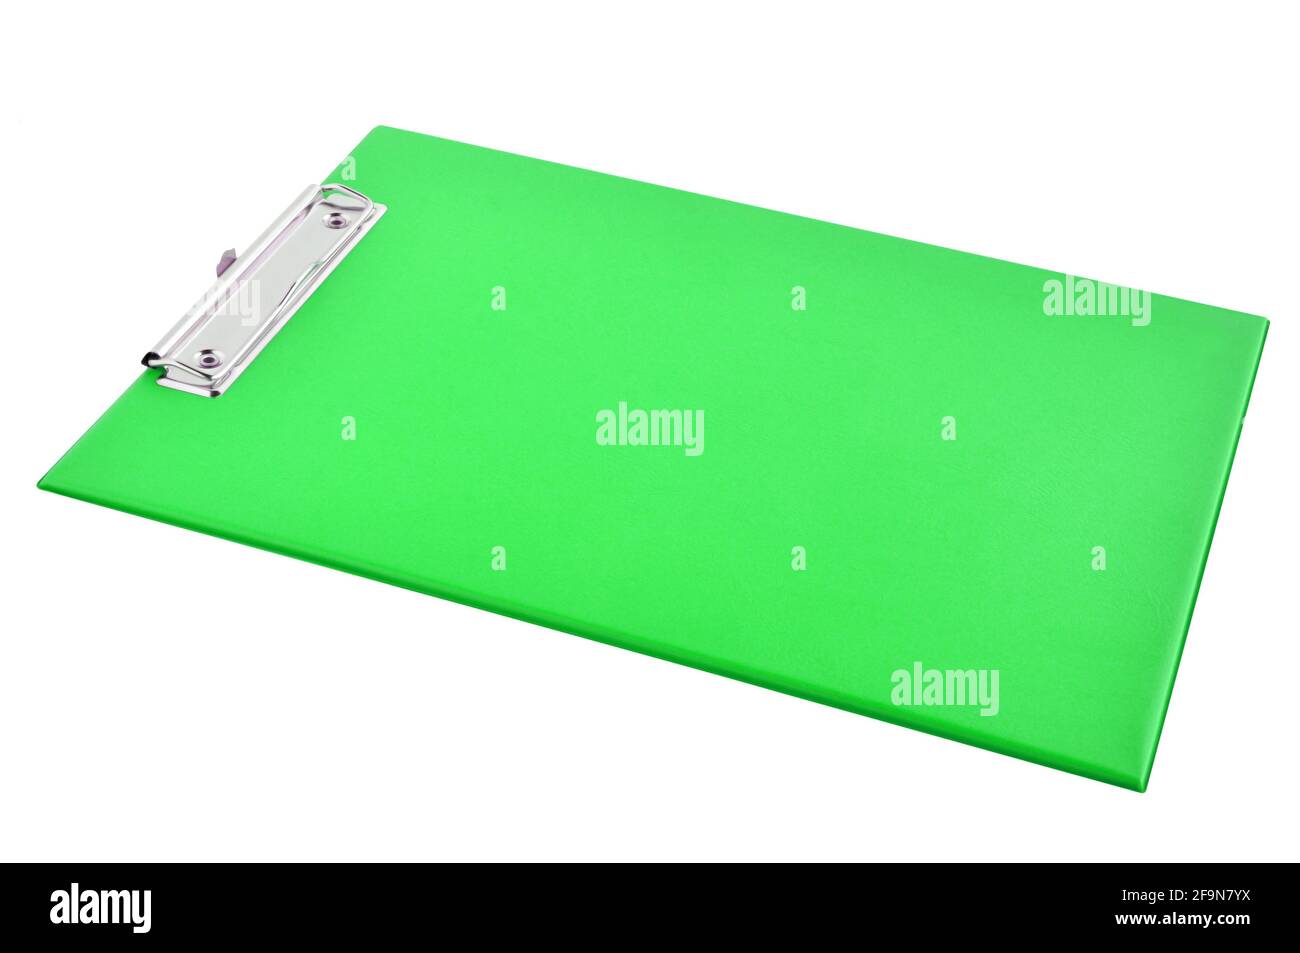 Clipboard - green plastic clipboard or writing board isolated on white background Stock Photo